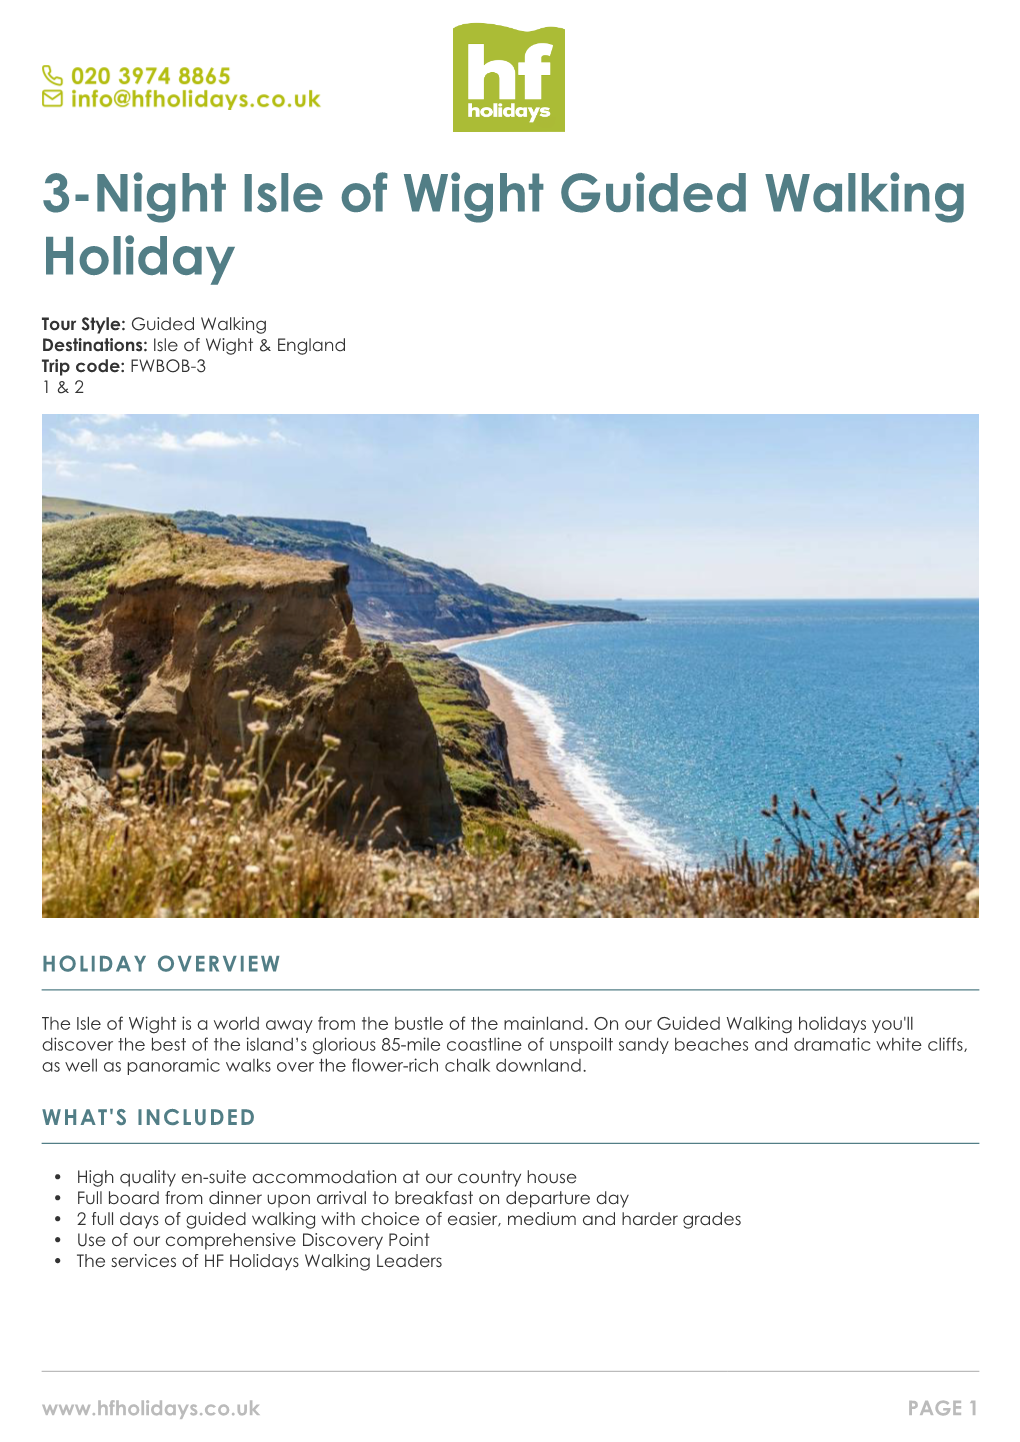 3-Night Isle of Wight Guided Walking Holiday